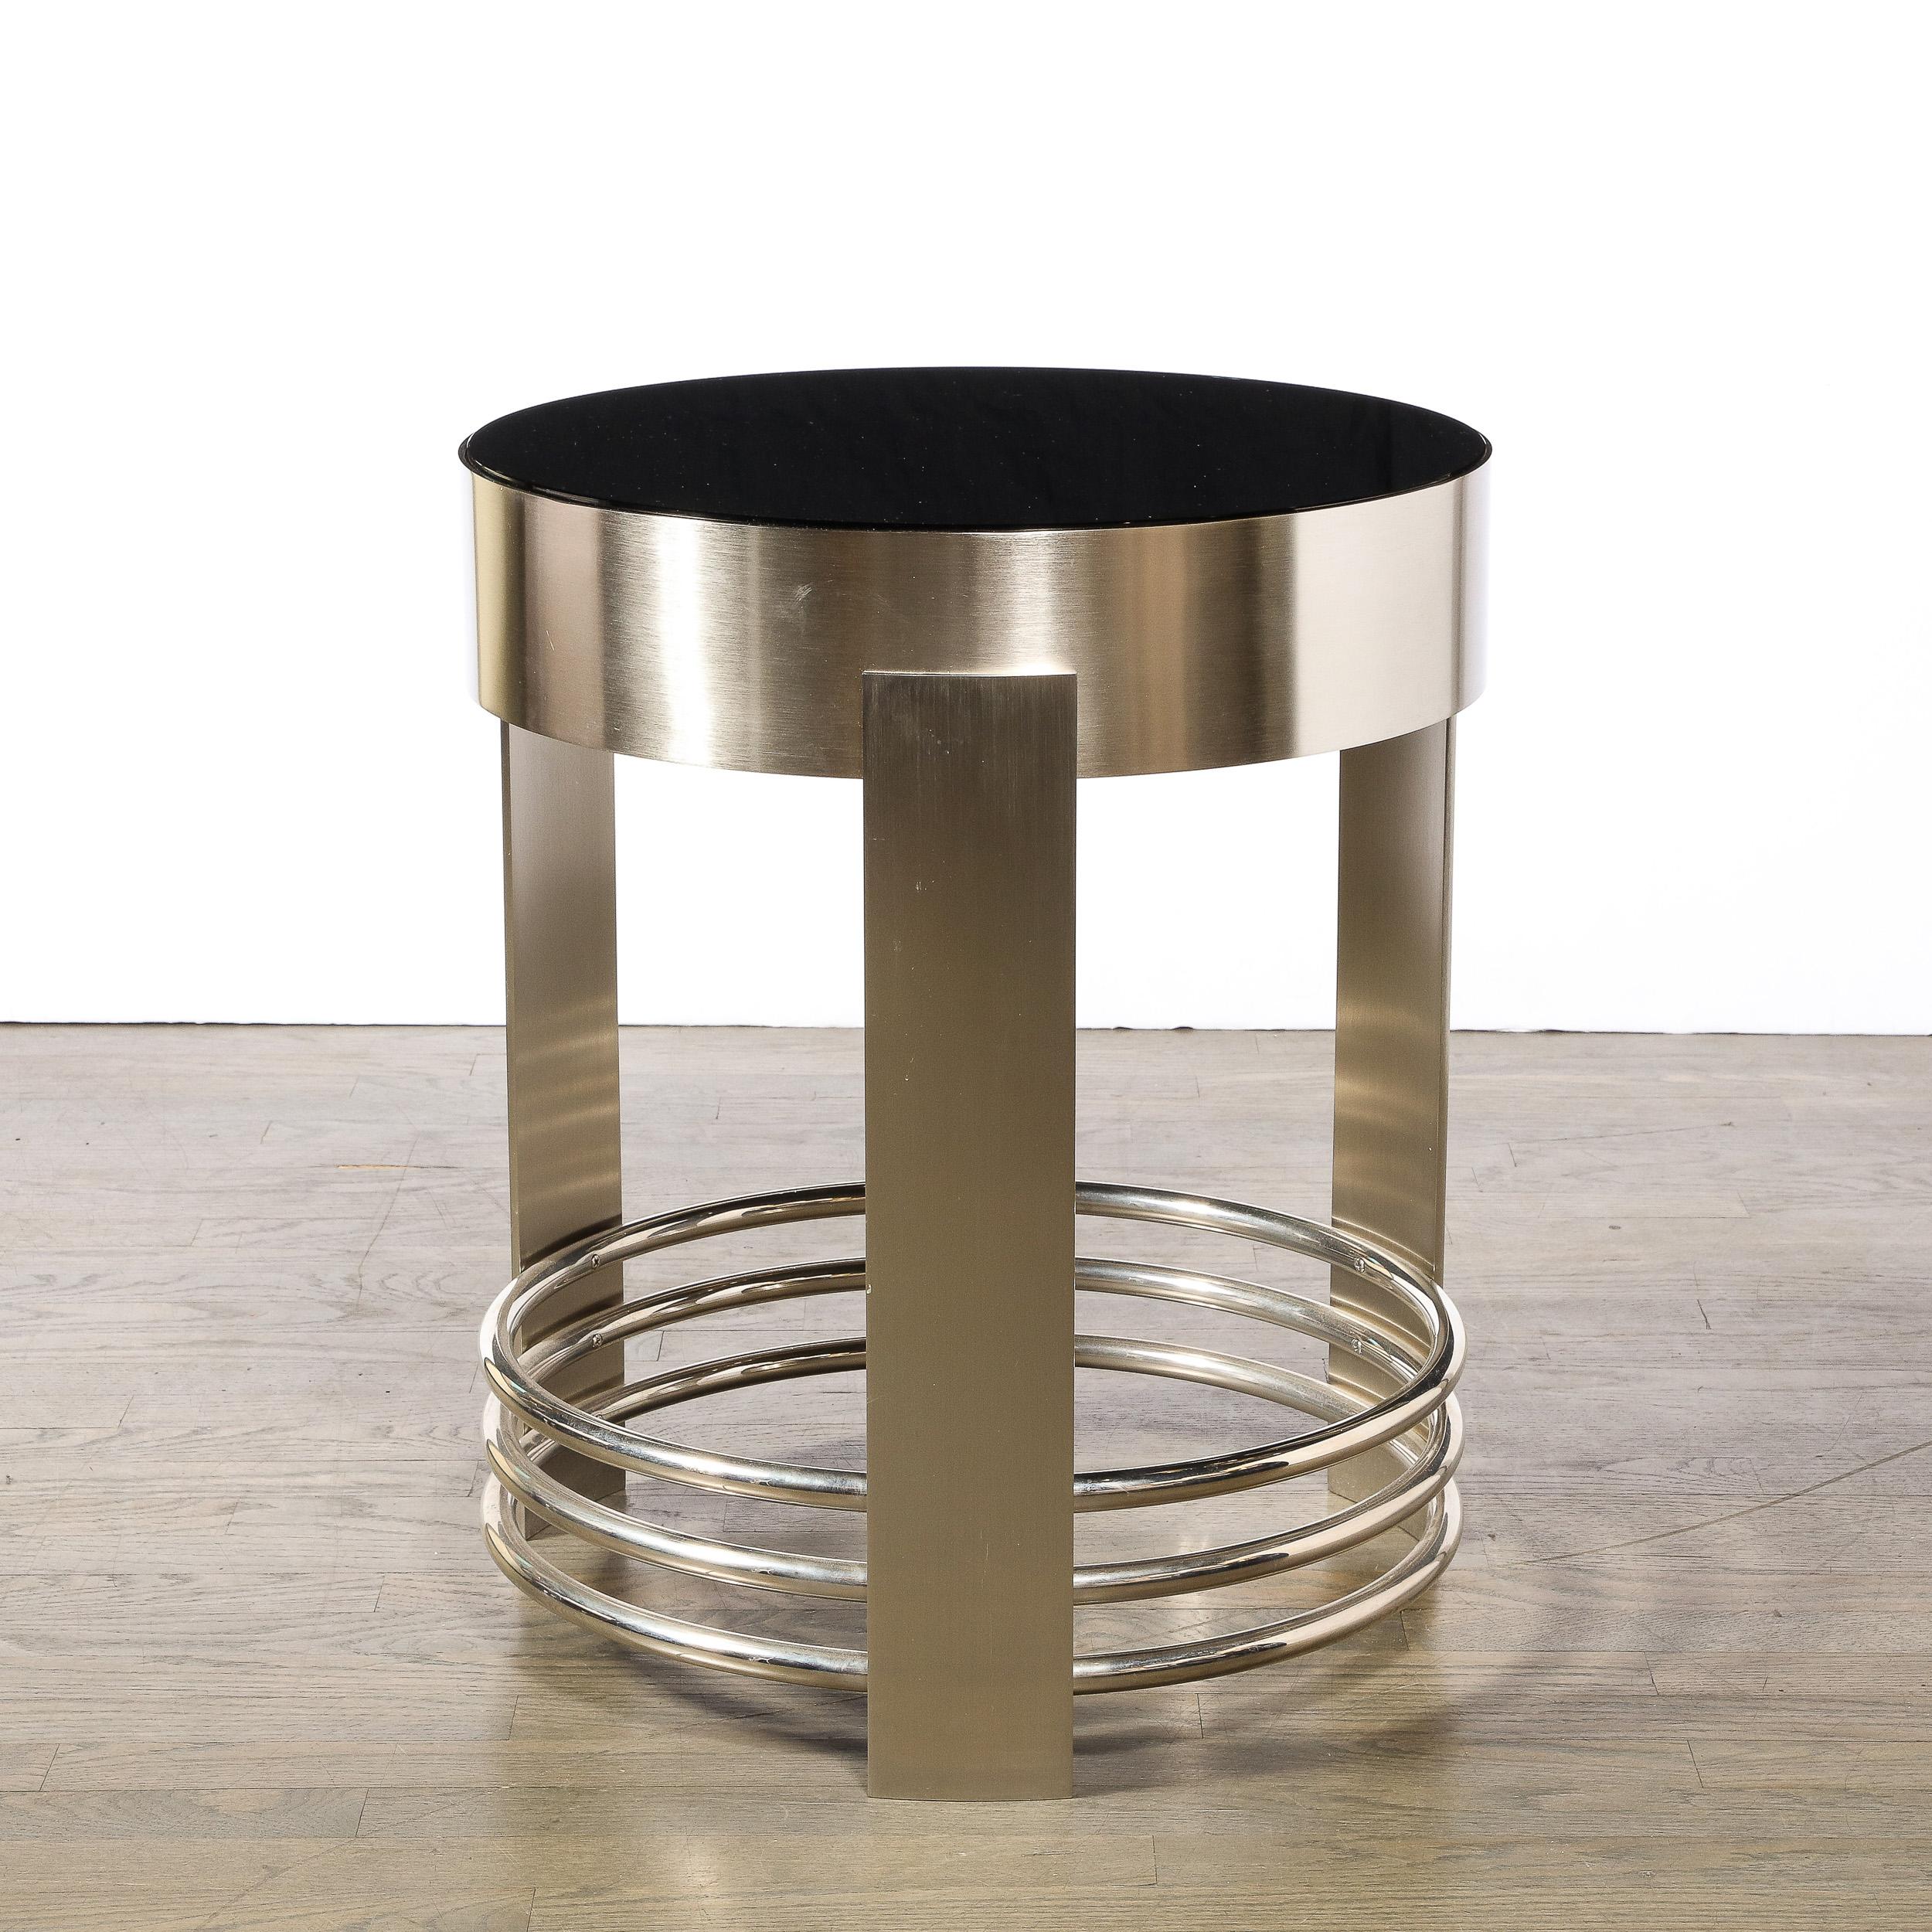 Aluminum Art Deco Revival Occasional Table in Brushed Nickel with Polished Banding